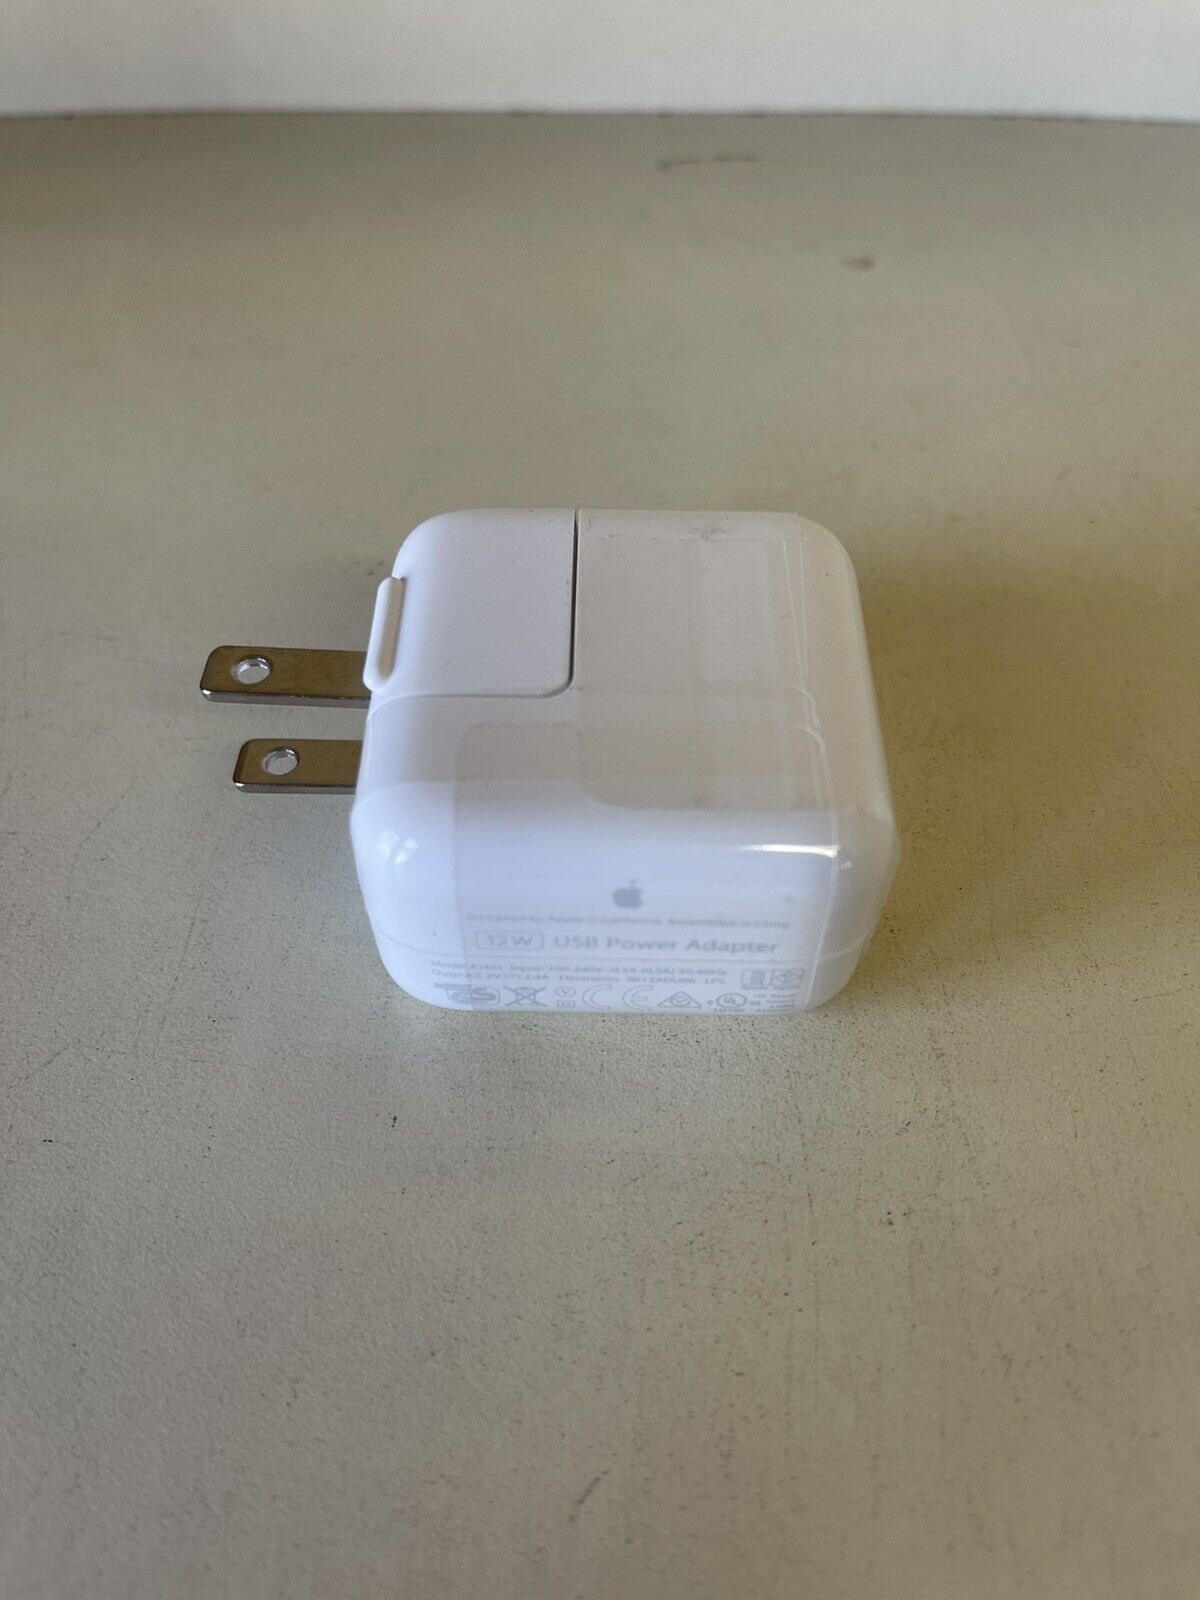 OEM Authentic 12W USB Power Adapter Wall Charger Sealed For Apple iPad Air 1 2 3